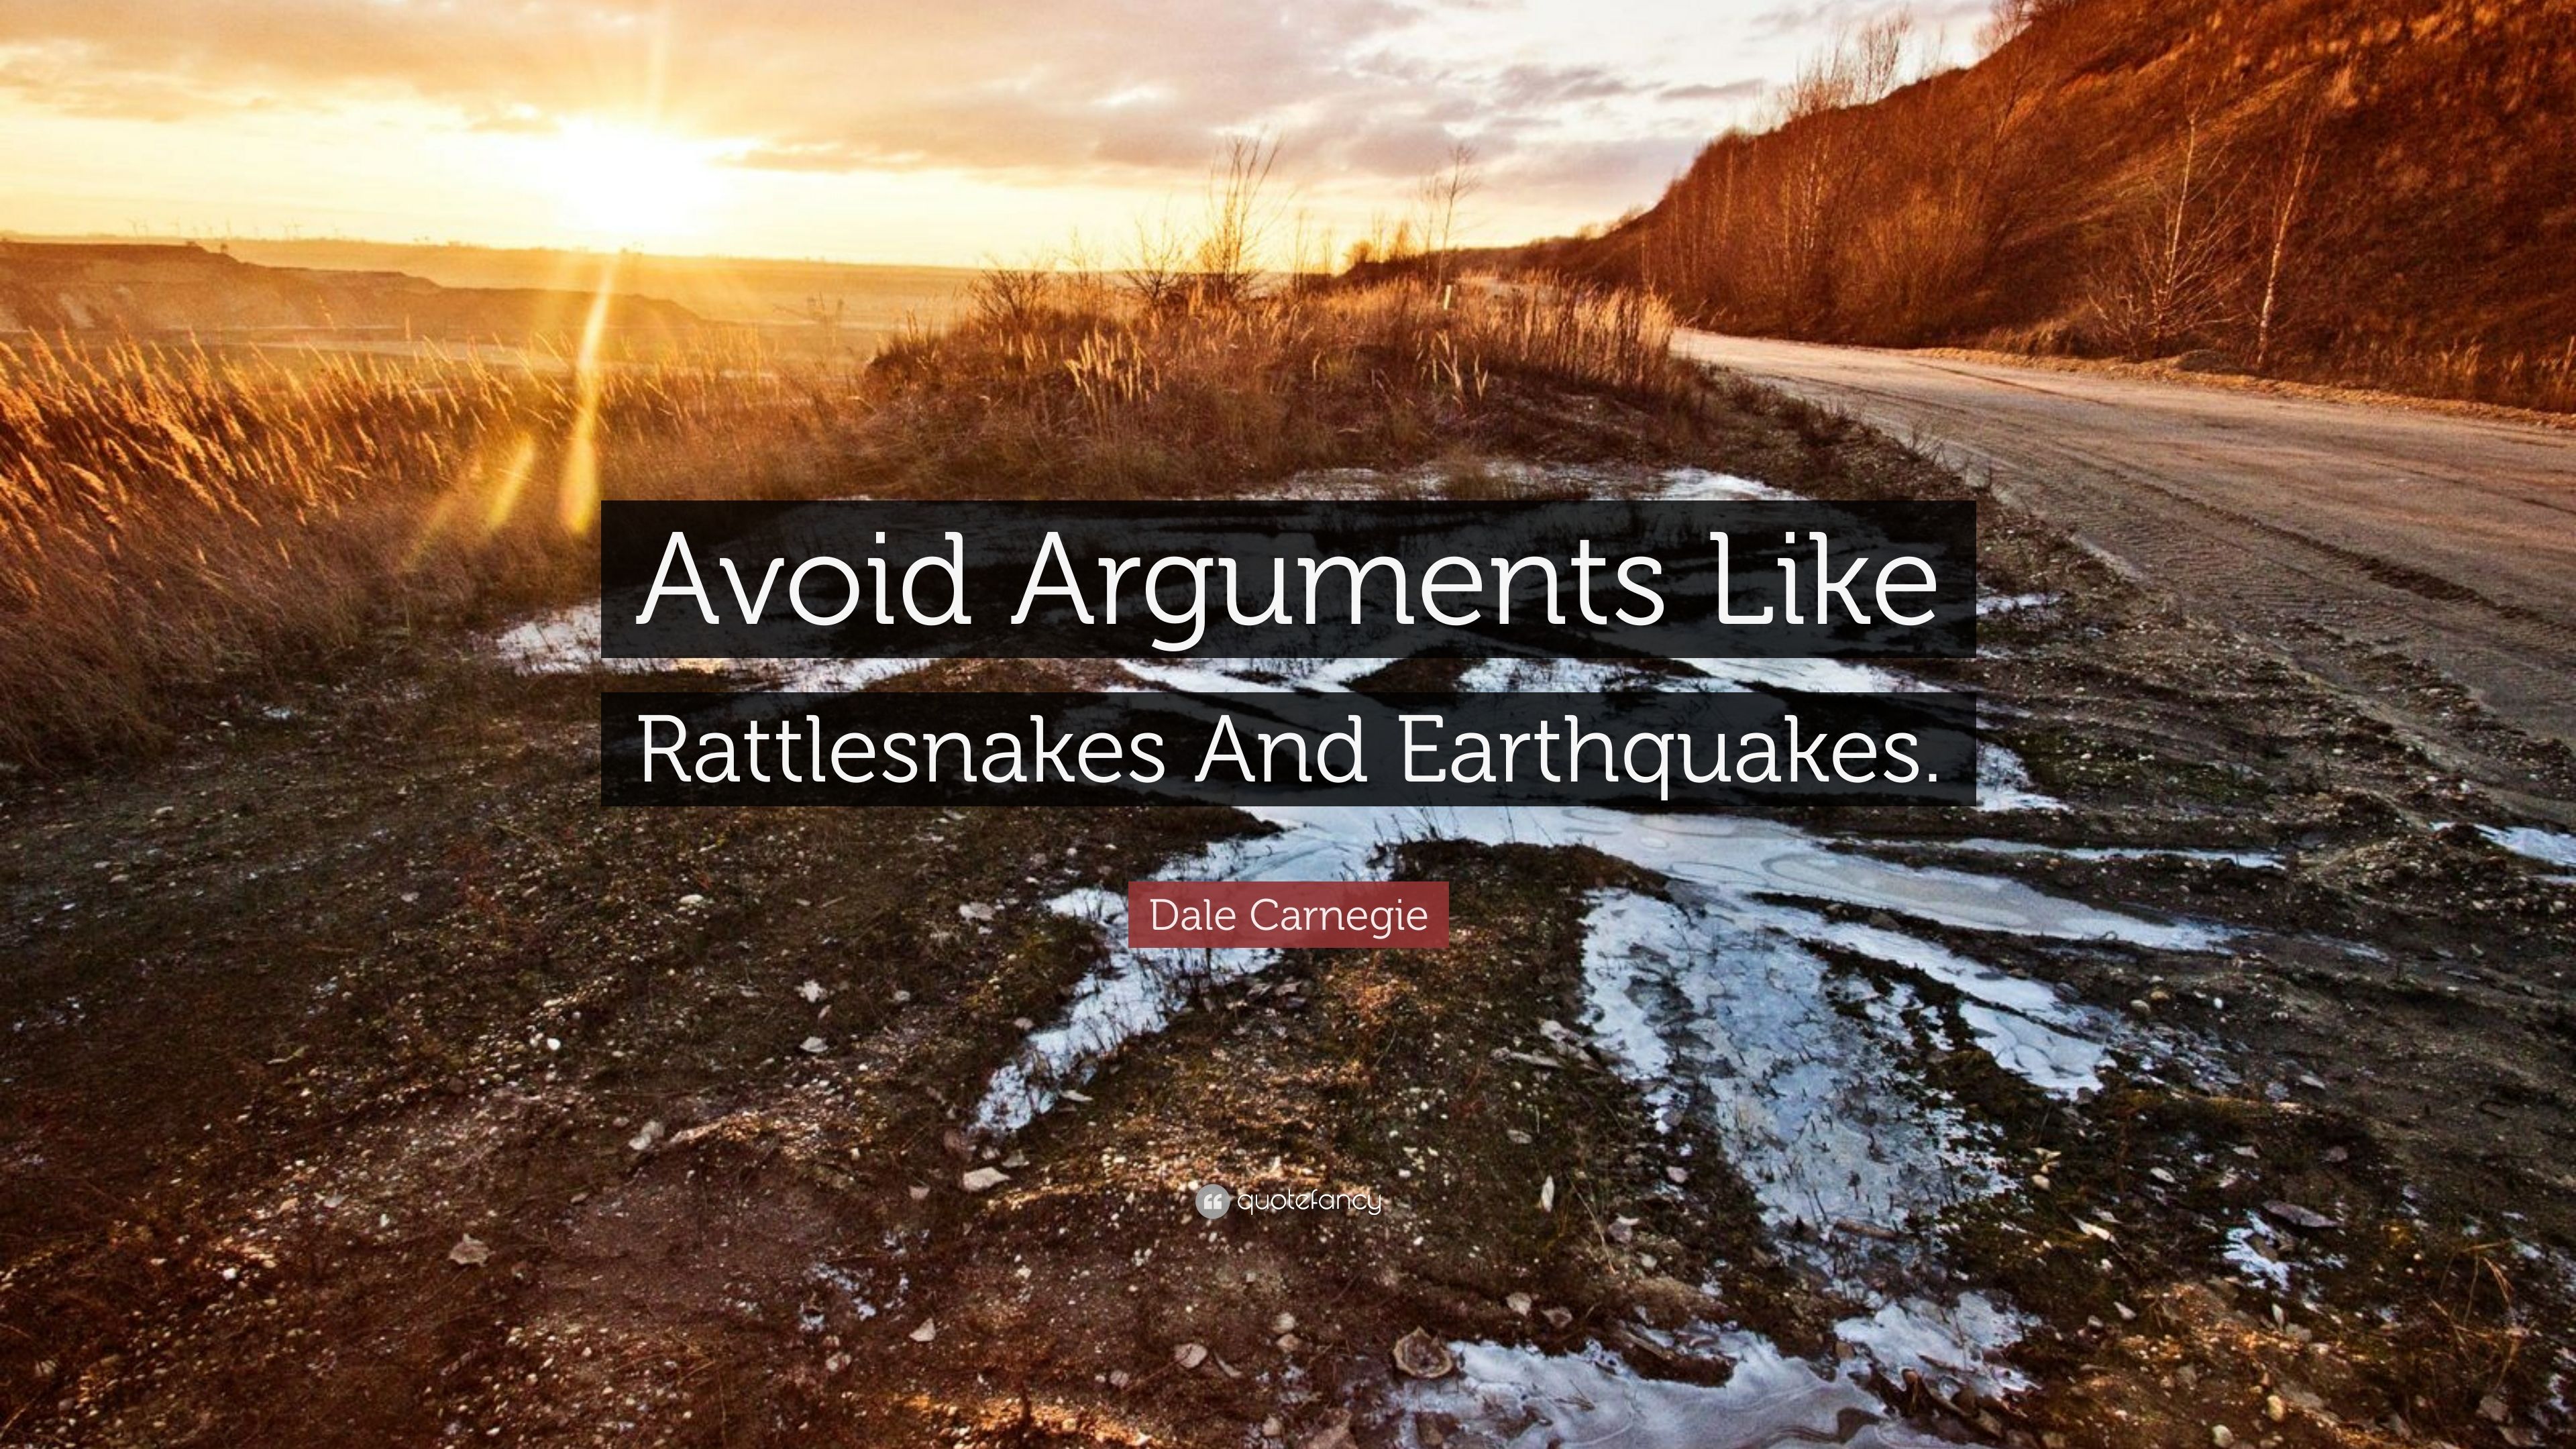 Dale Carnegie Quote: “Avoid Arguments Like Rattlesnakes